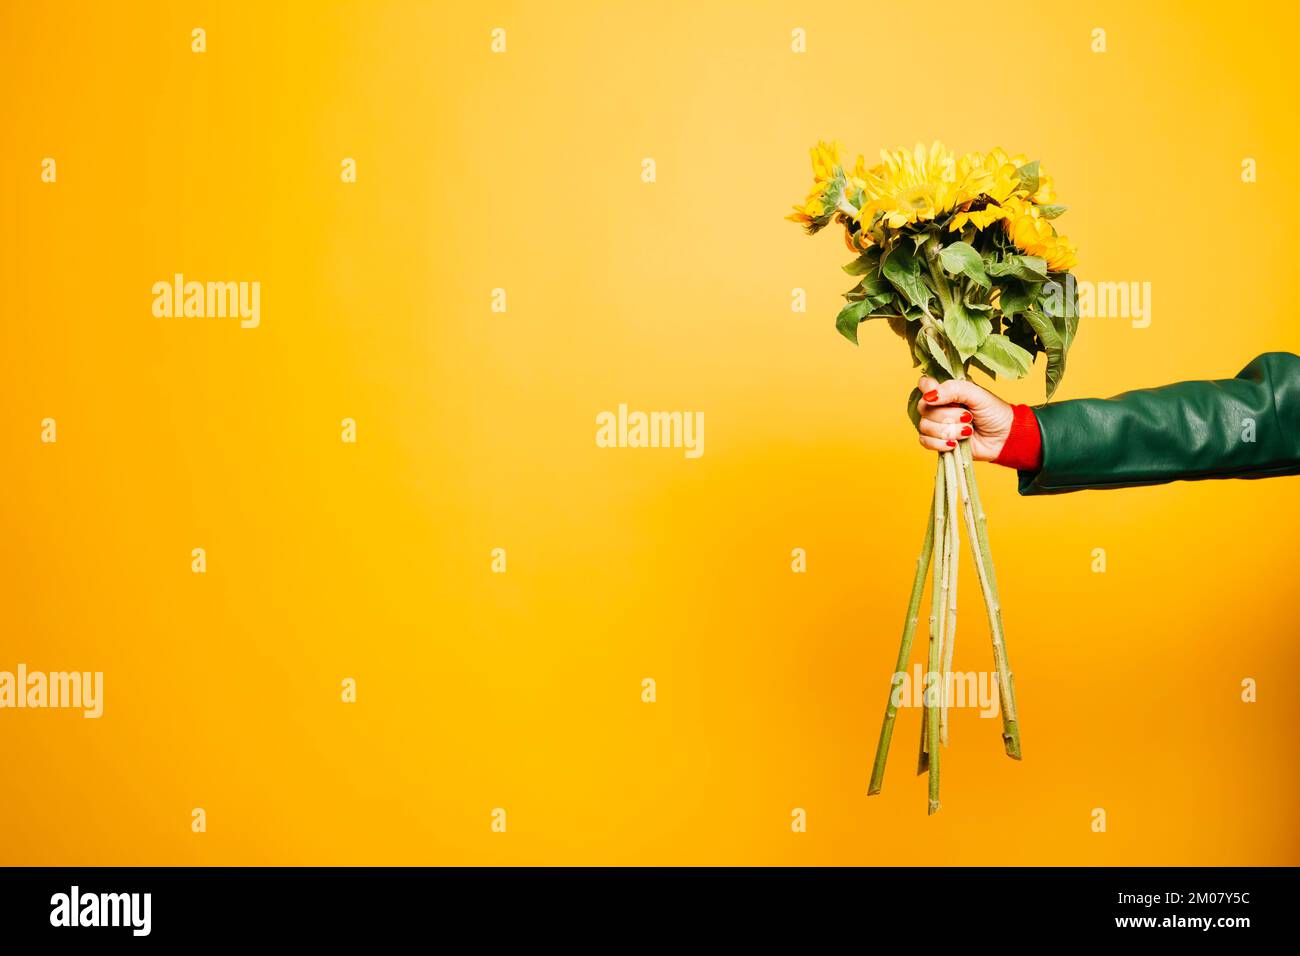 Hands of a senior woman holding a sunflower bouquet over a yellow background Stock Photo